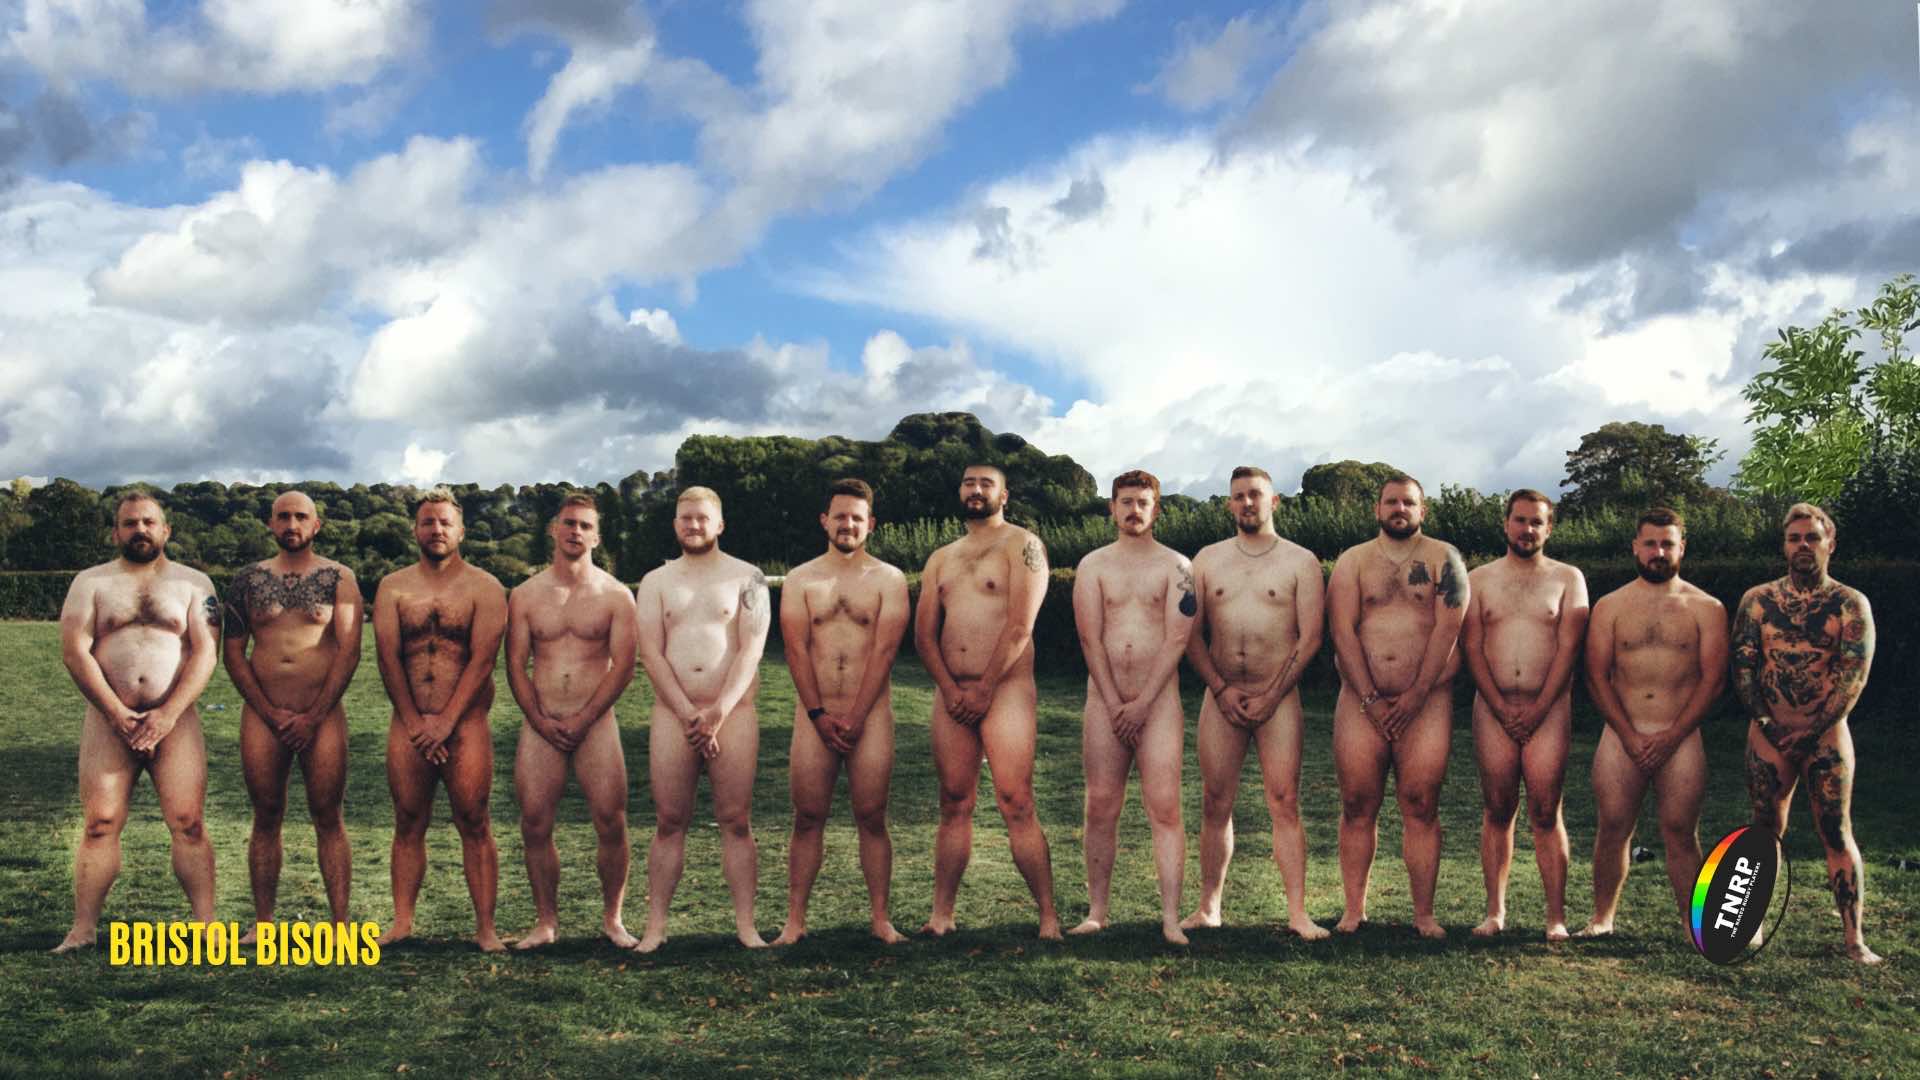 Even Prince Harry appreciates the Naked Rugby Players